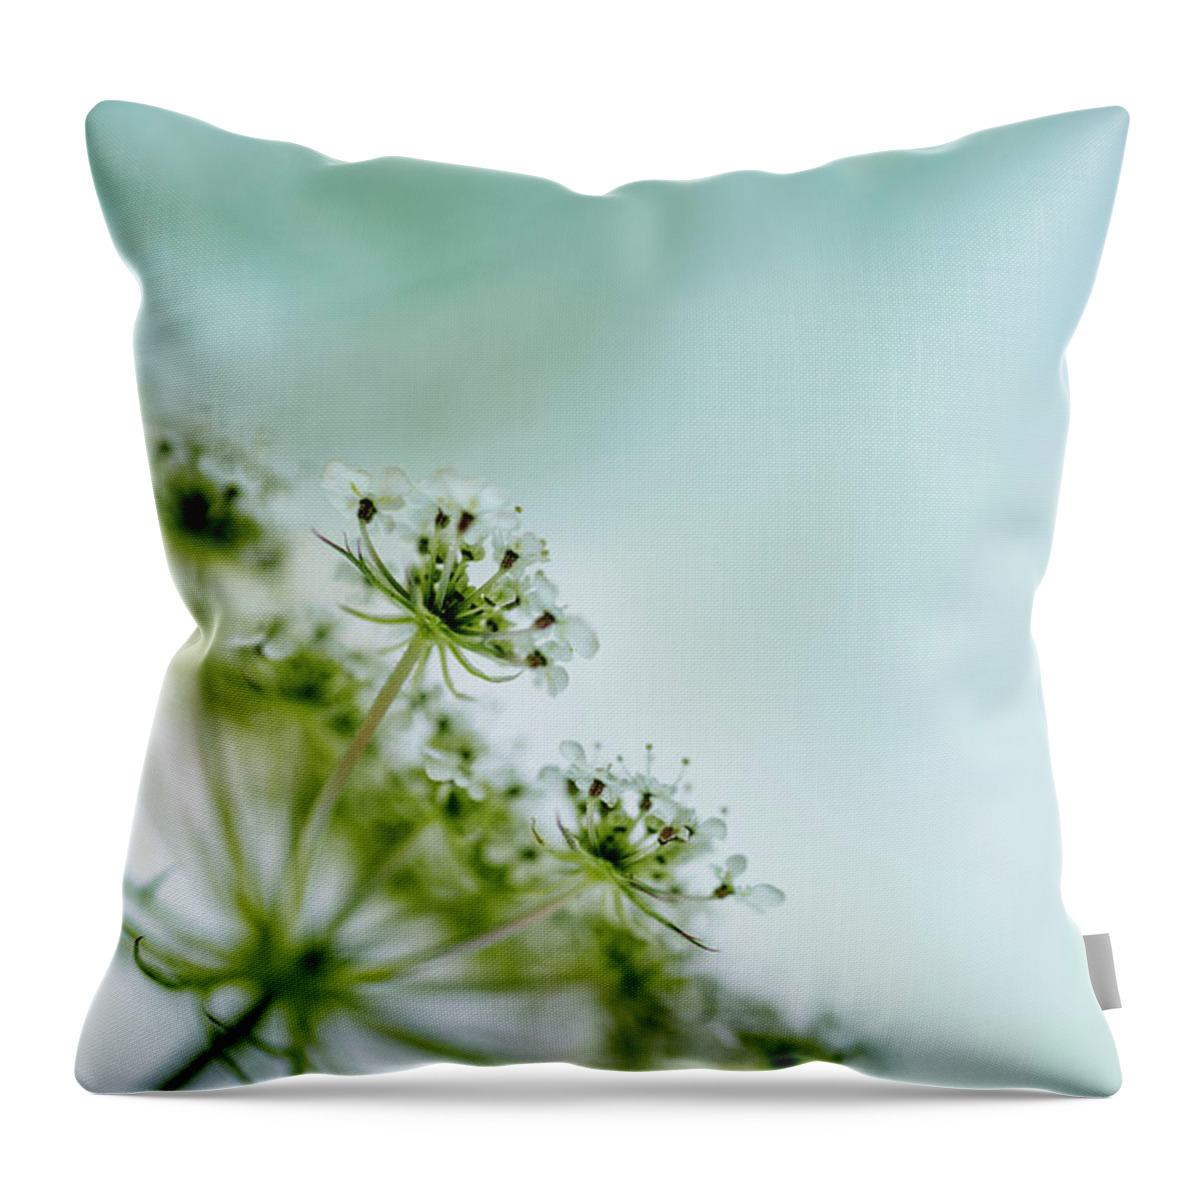 Umbel Throw Pillow featuring the photograph Fragile #1 by Nailia Schwarz